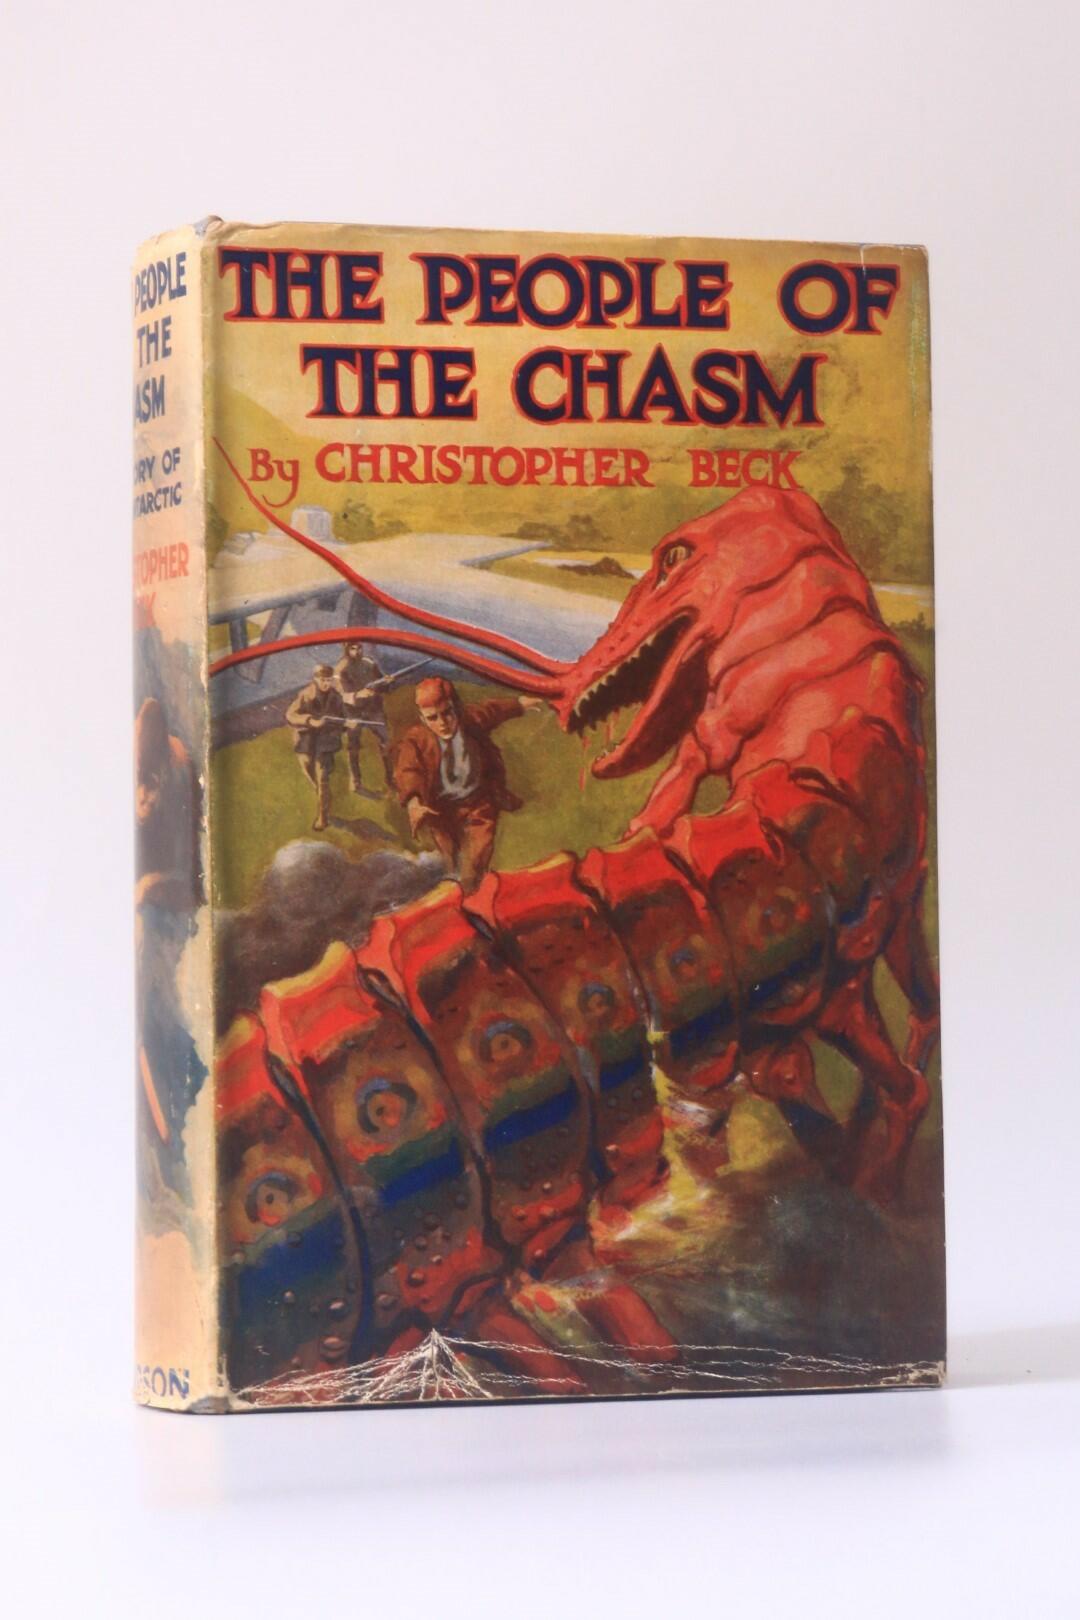 Christopher Beck [T.C. Bridges] - The People of the Chasm - Pearson, n.d. [c1924], Second Edition.